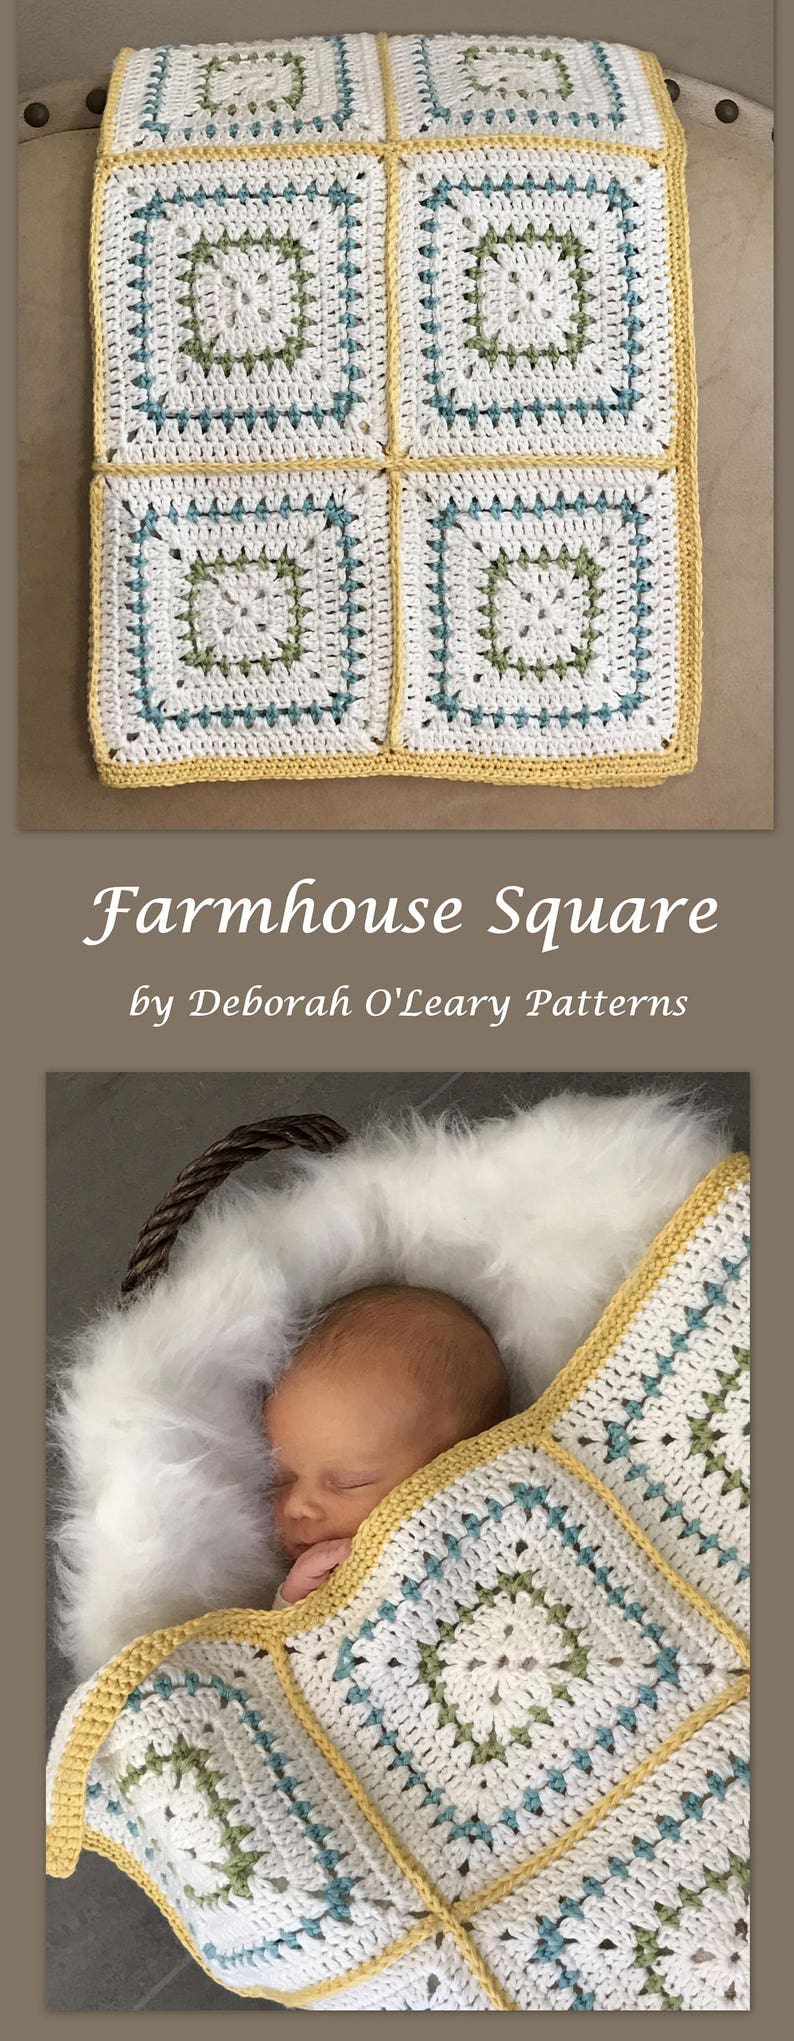 Crochet Baby Blanket Pattern Chunky Granny Squares Farmhouse Square Throw Easy Pattern by Deborah O'Leary Patterns English Only image 4